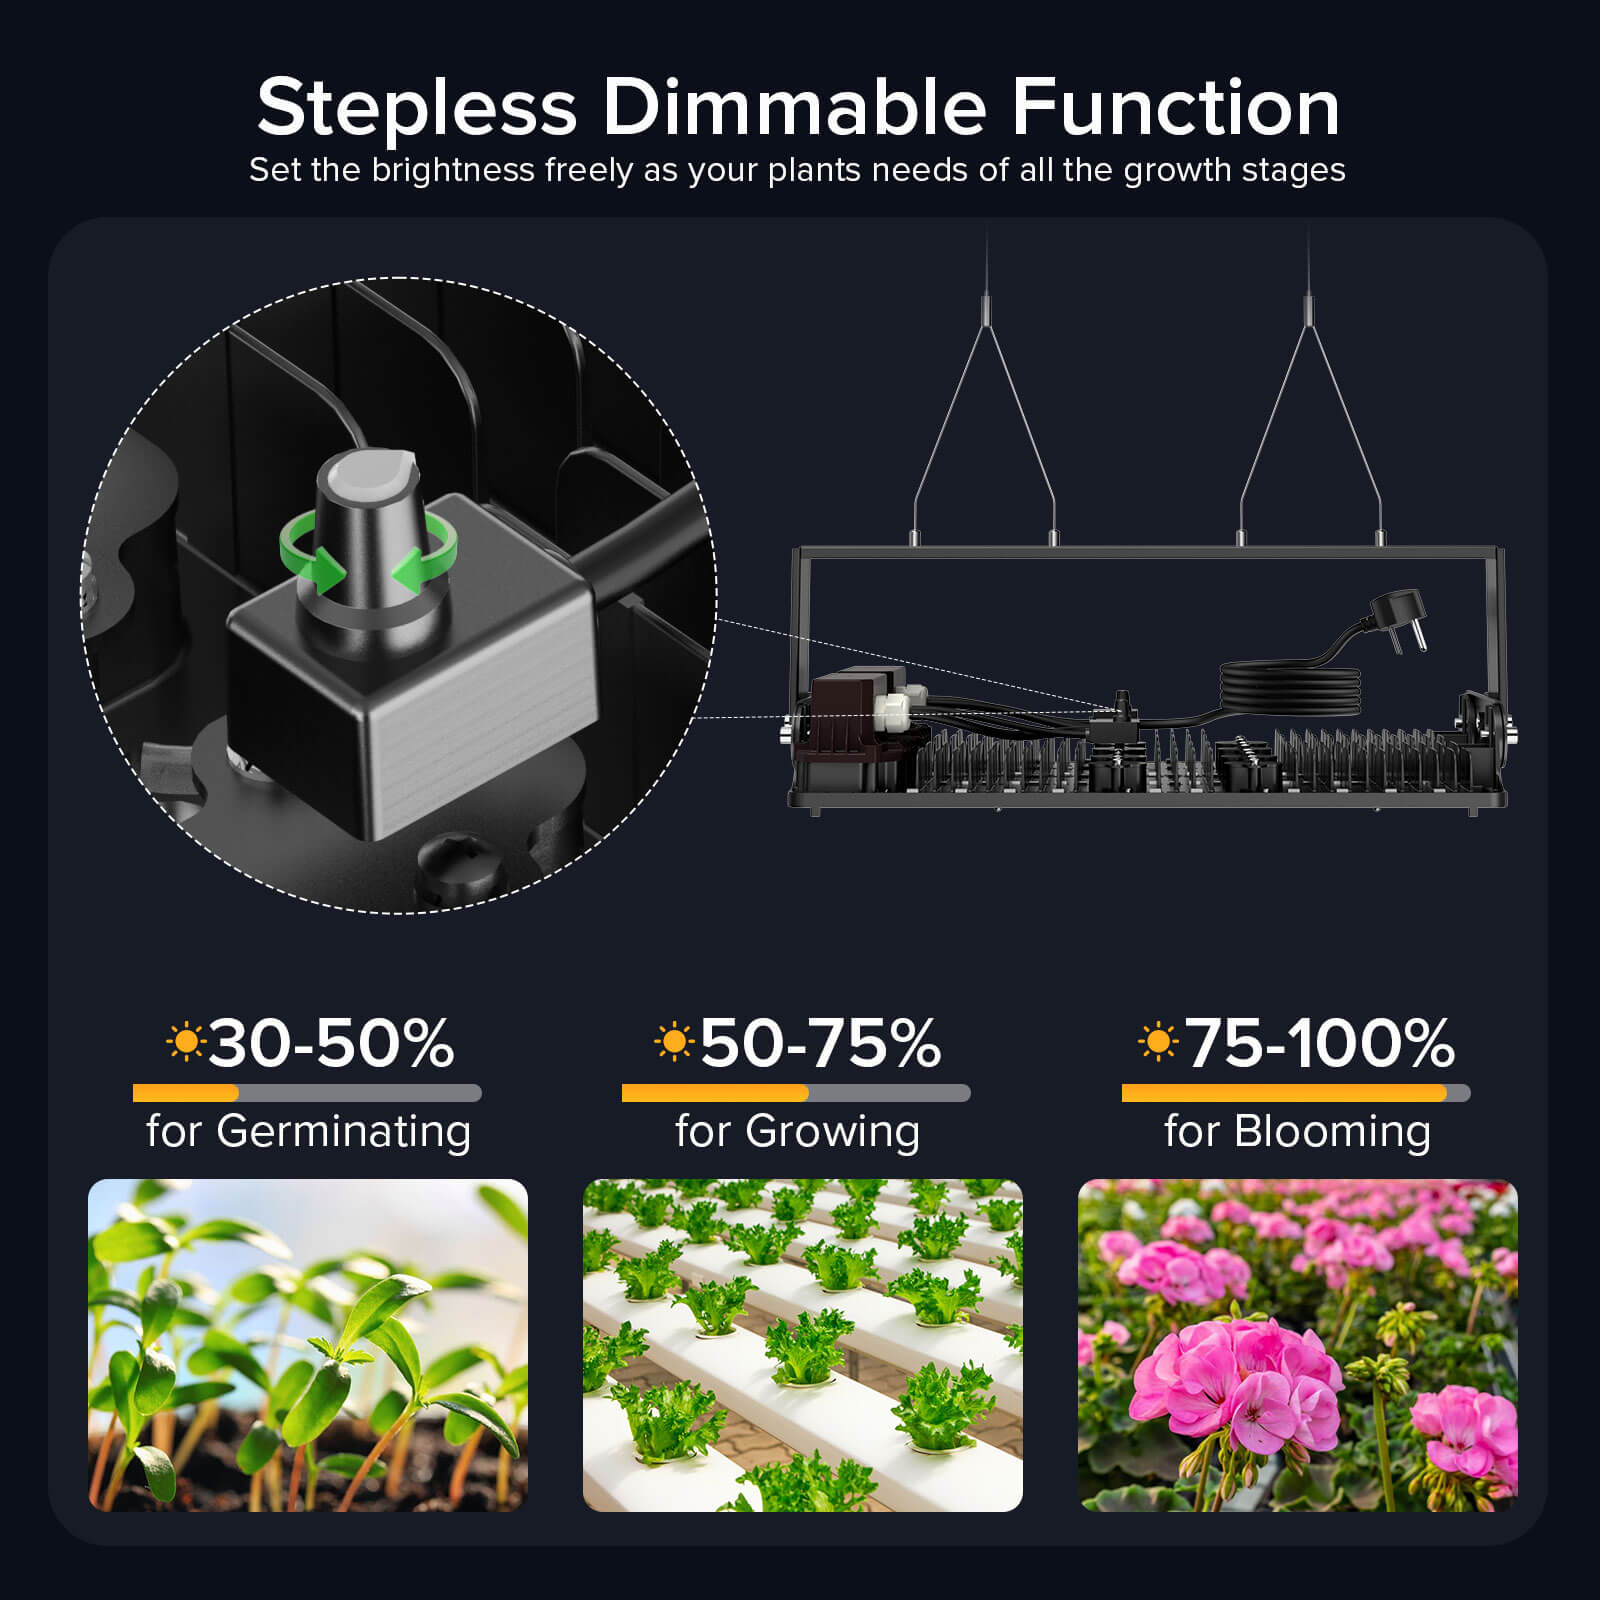 Dimmable 200W led grow light for Grow Tent has stepless dimmable function